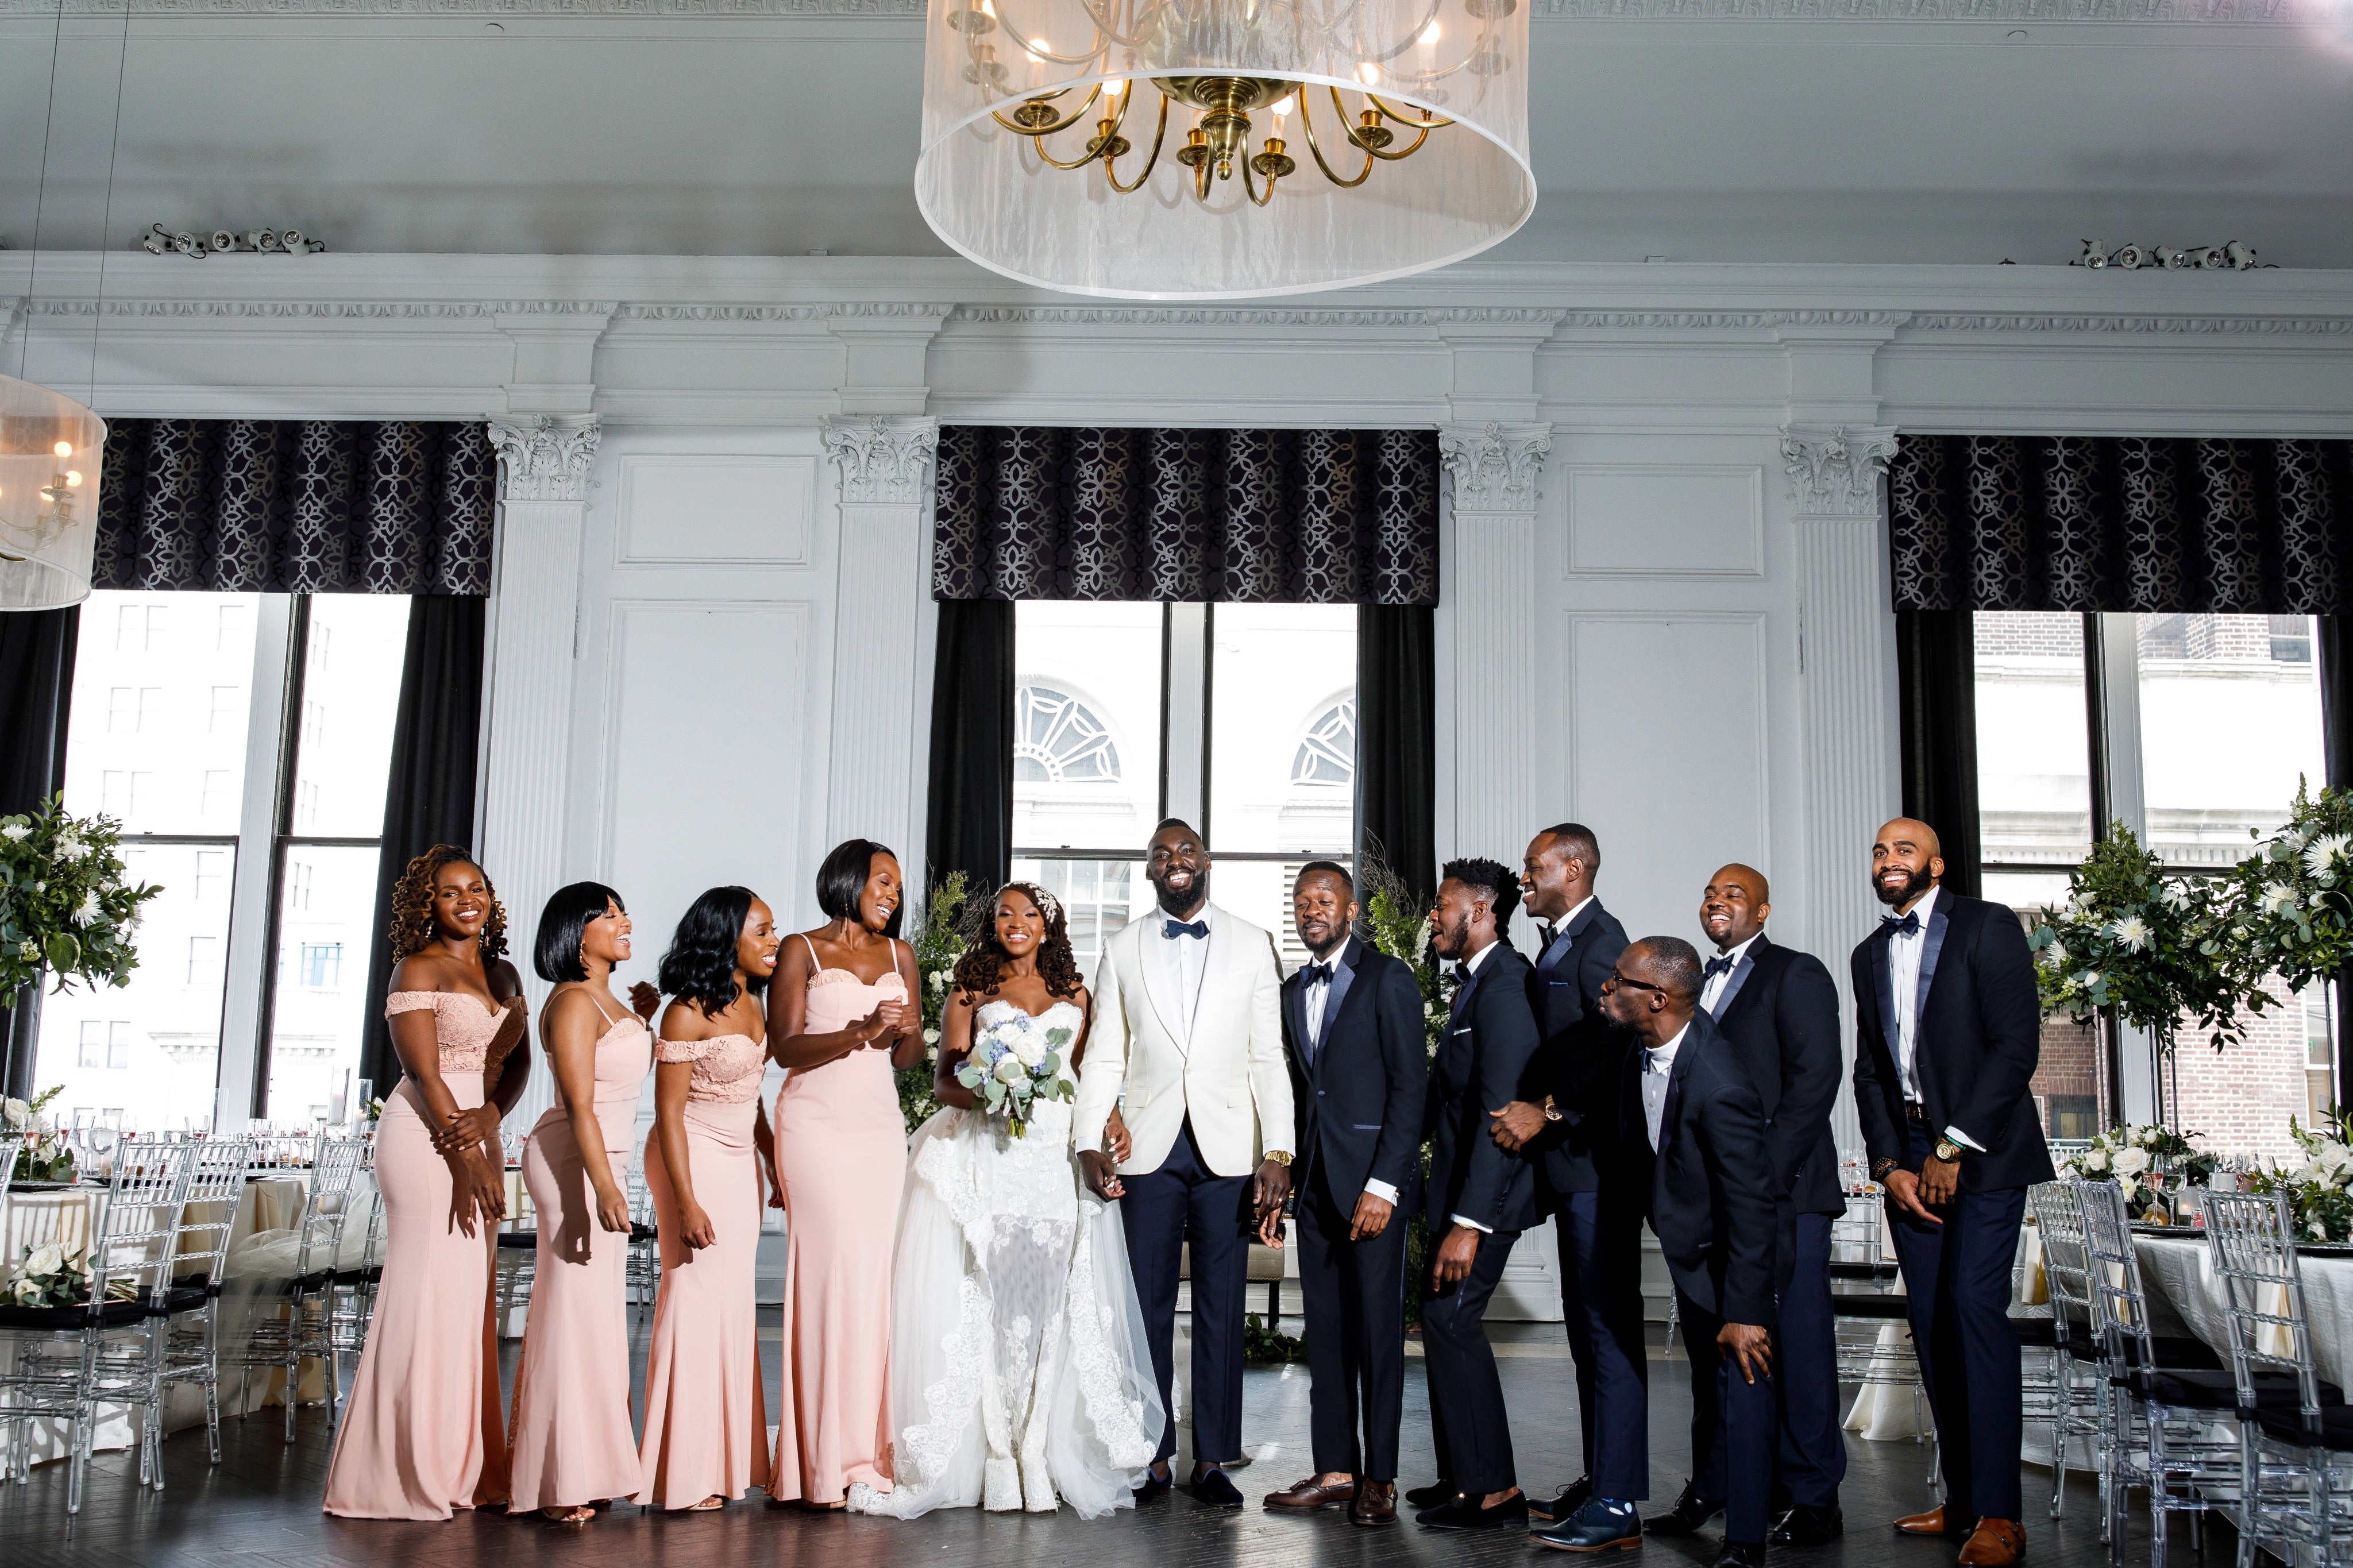 Bridal Bliss: Eric And Janell's Philly Wedding Style Deserves Applause
